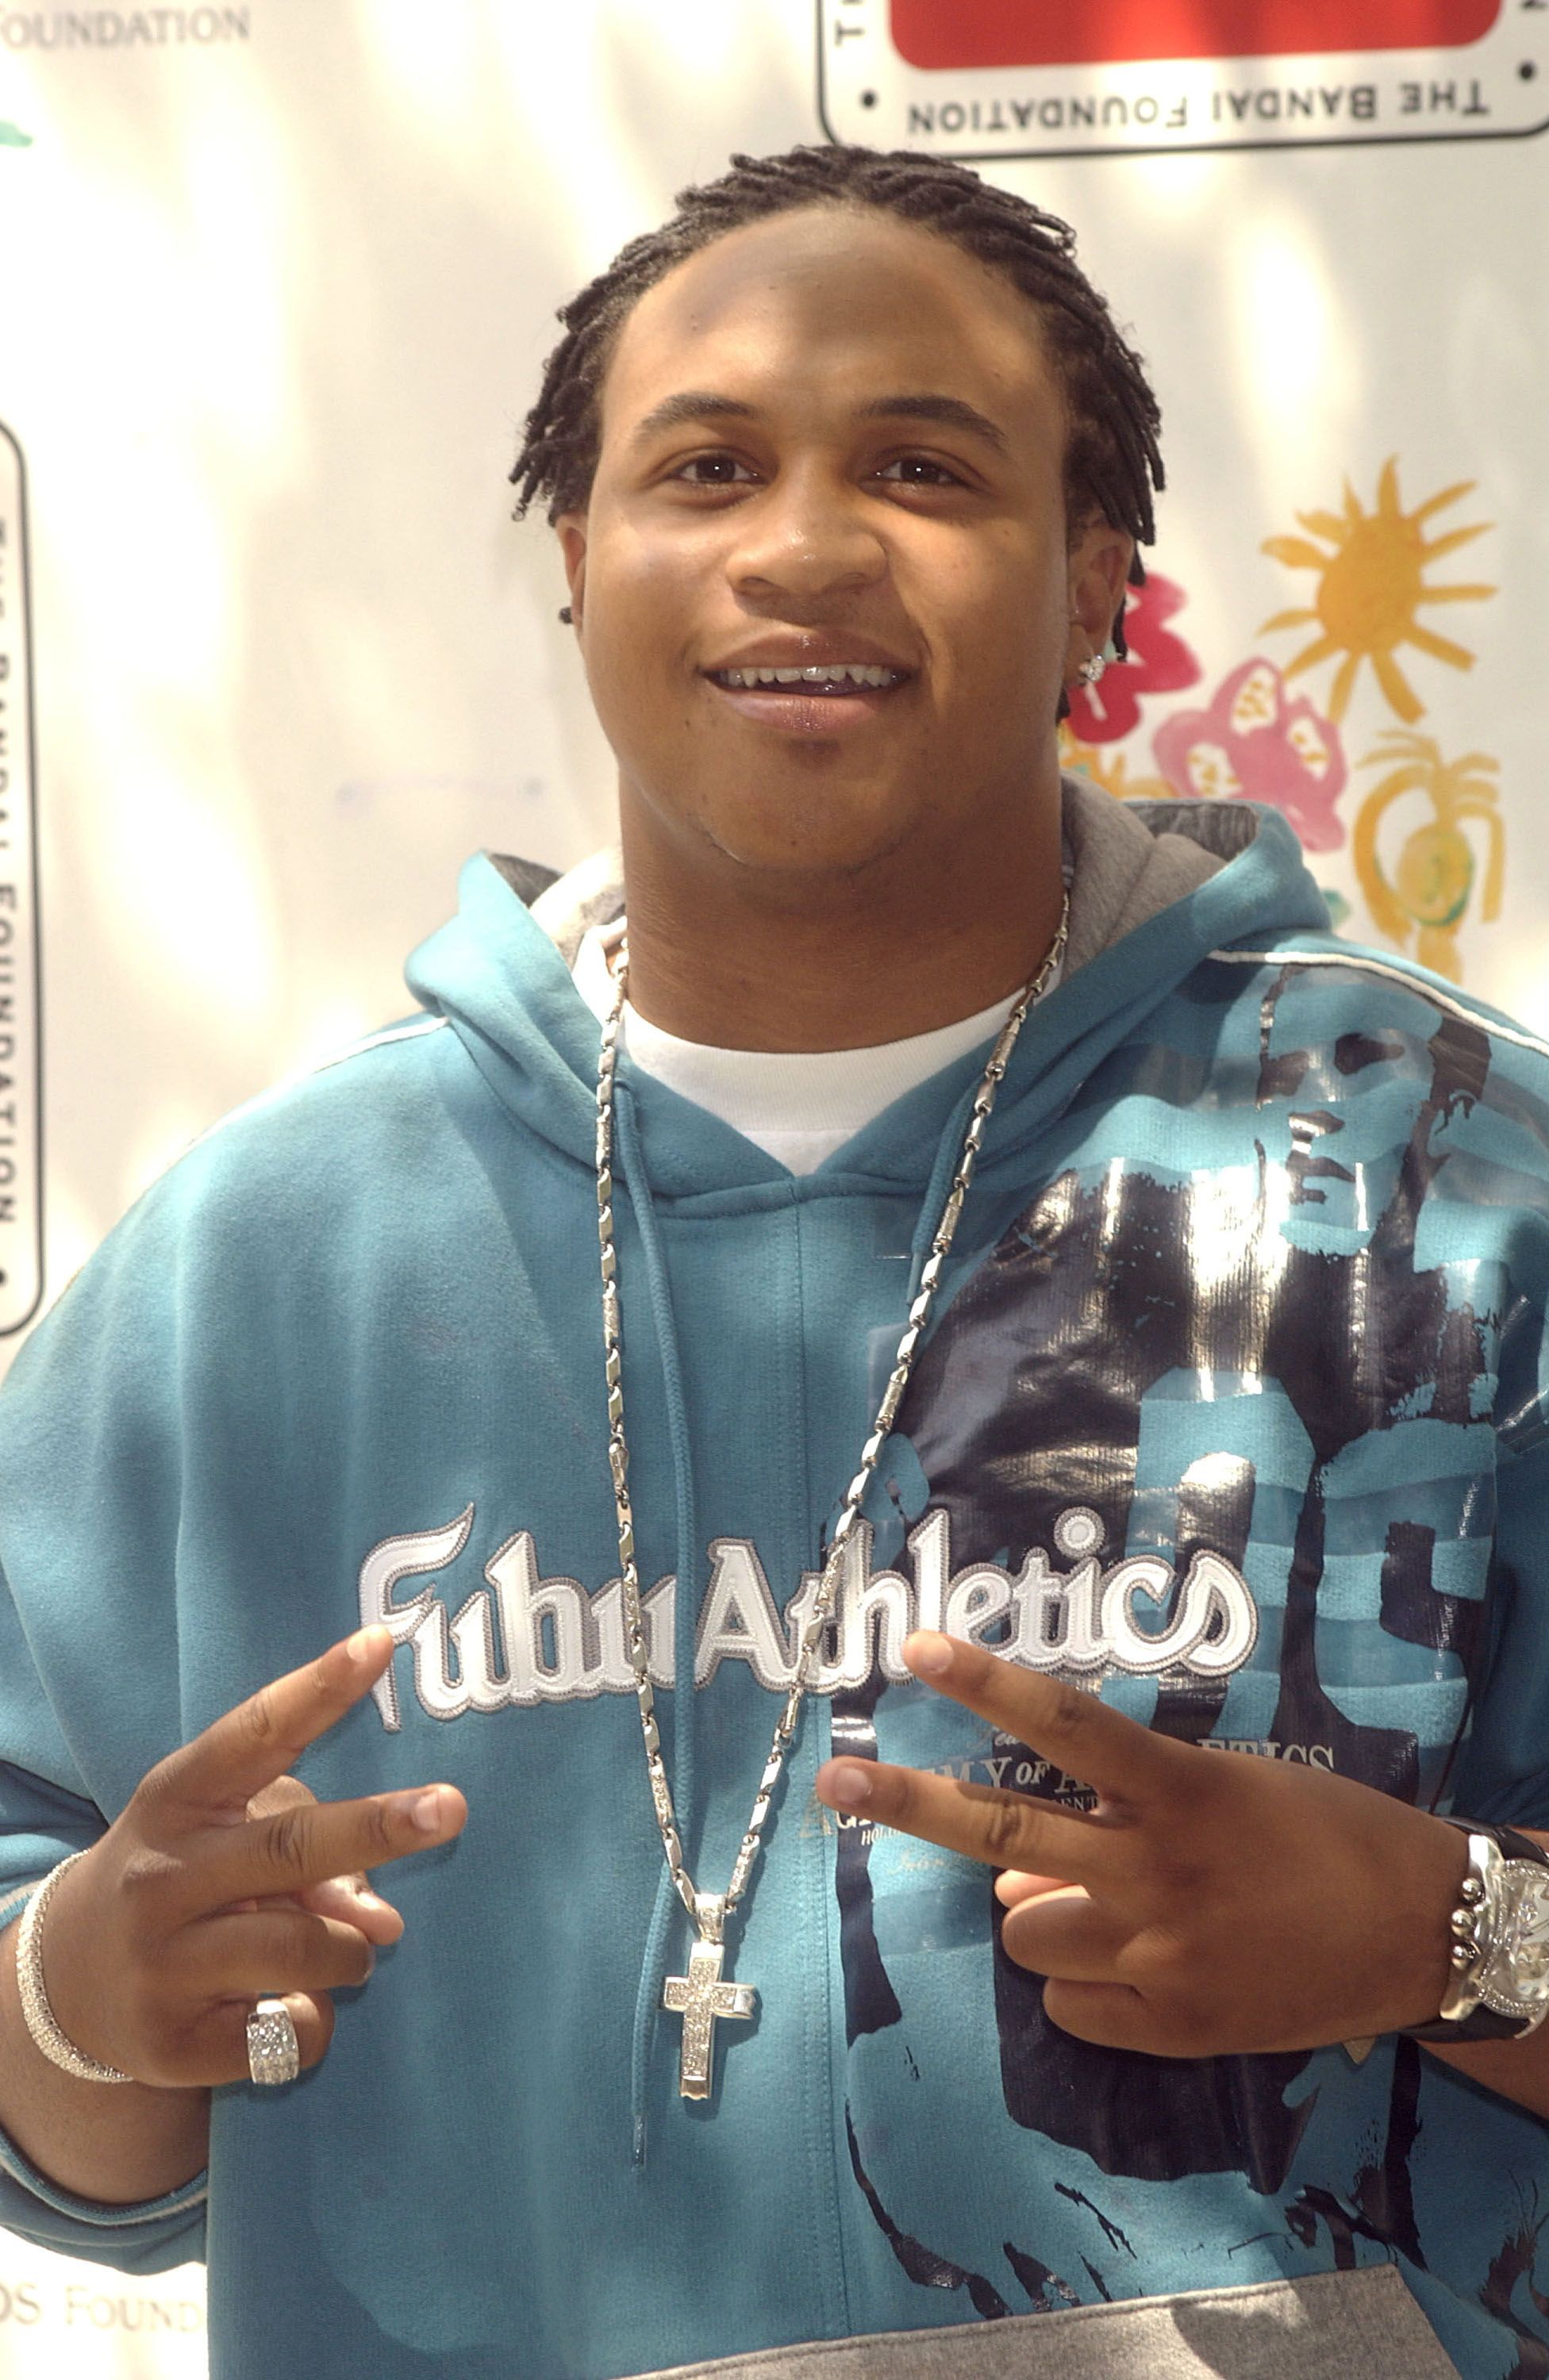 Orlando Brown arrives at the "Elizabeth Glaser Pediatric AIDS Foundation Benefit" in 2004 in New York | Source: Getty Images